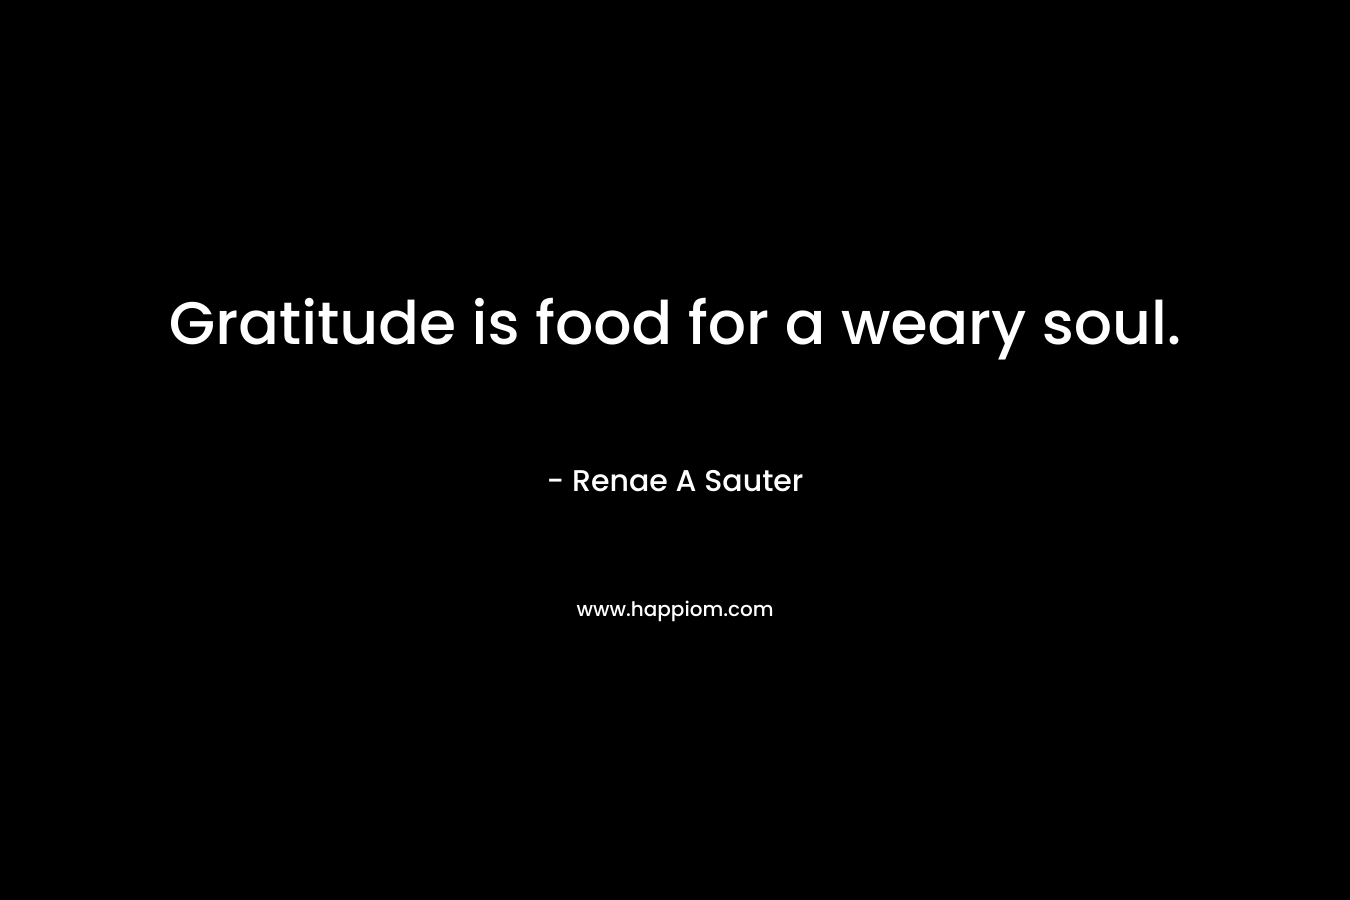 Gratitude is food for a weary soul.